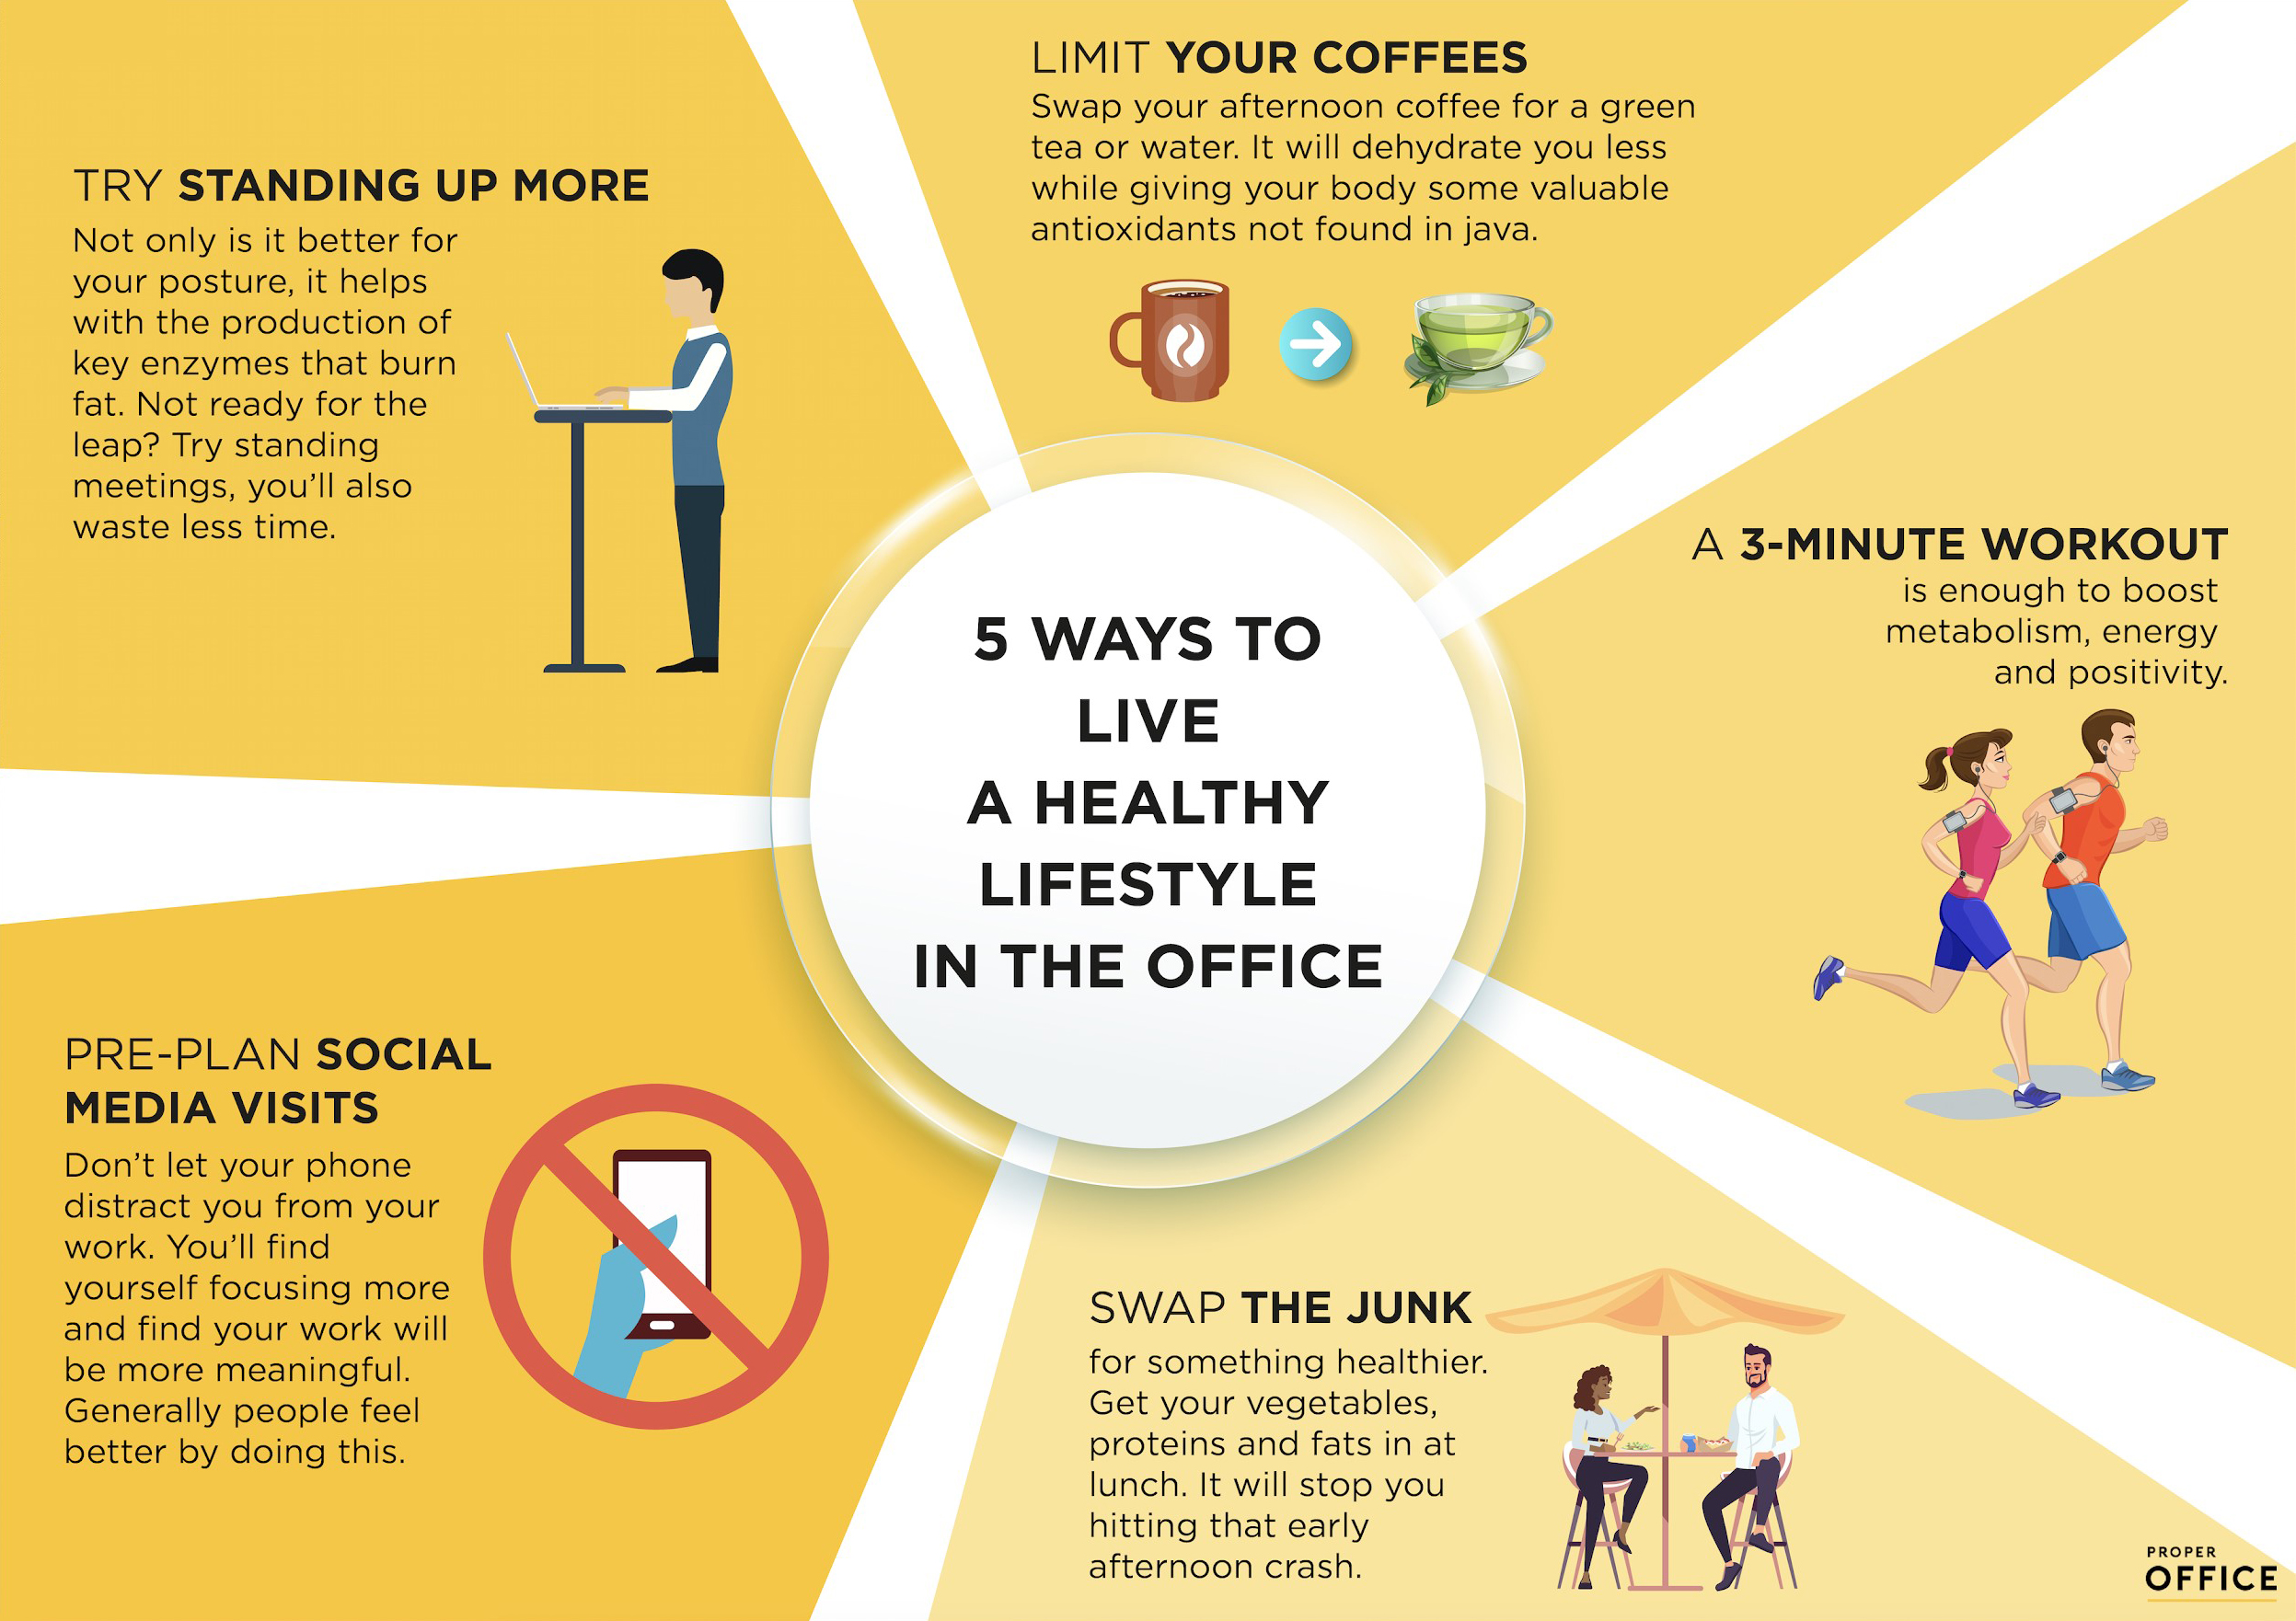 Different Ways To Live A Healthy Lifestyle For Good Health We Need